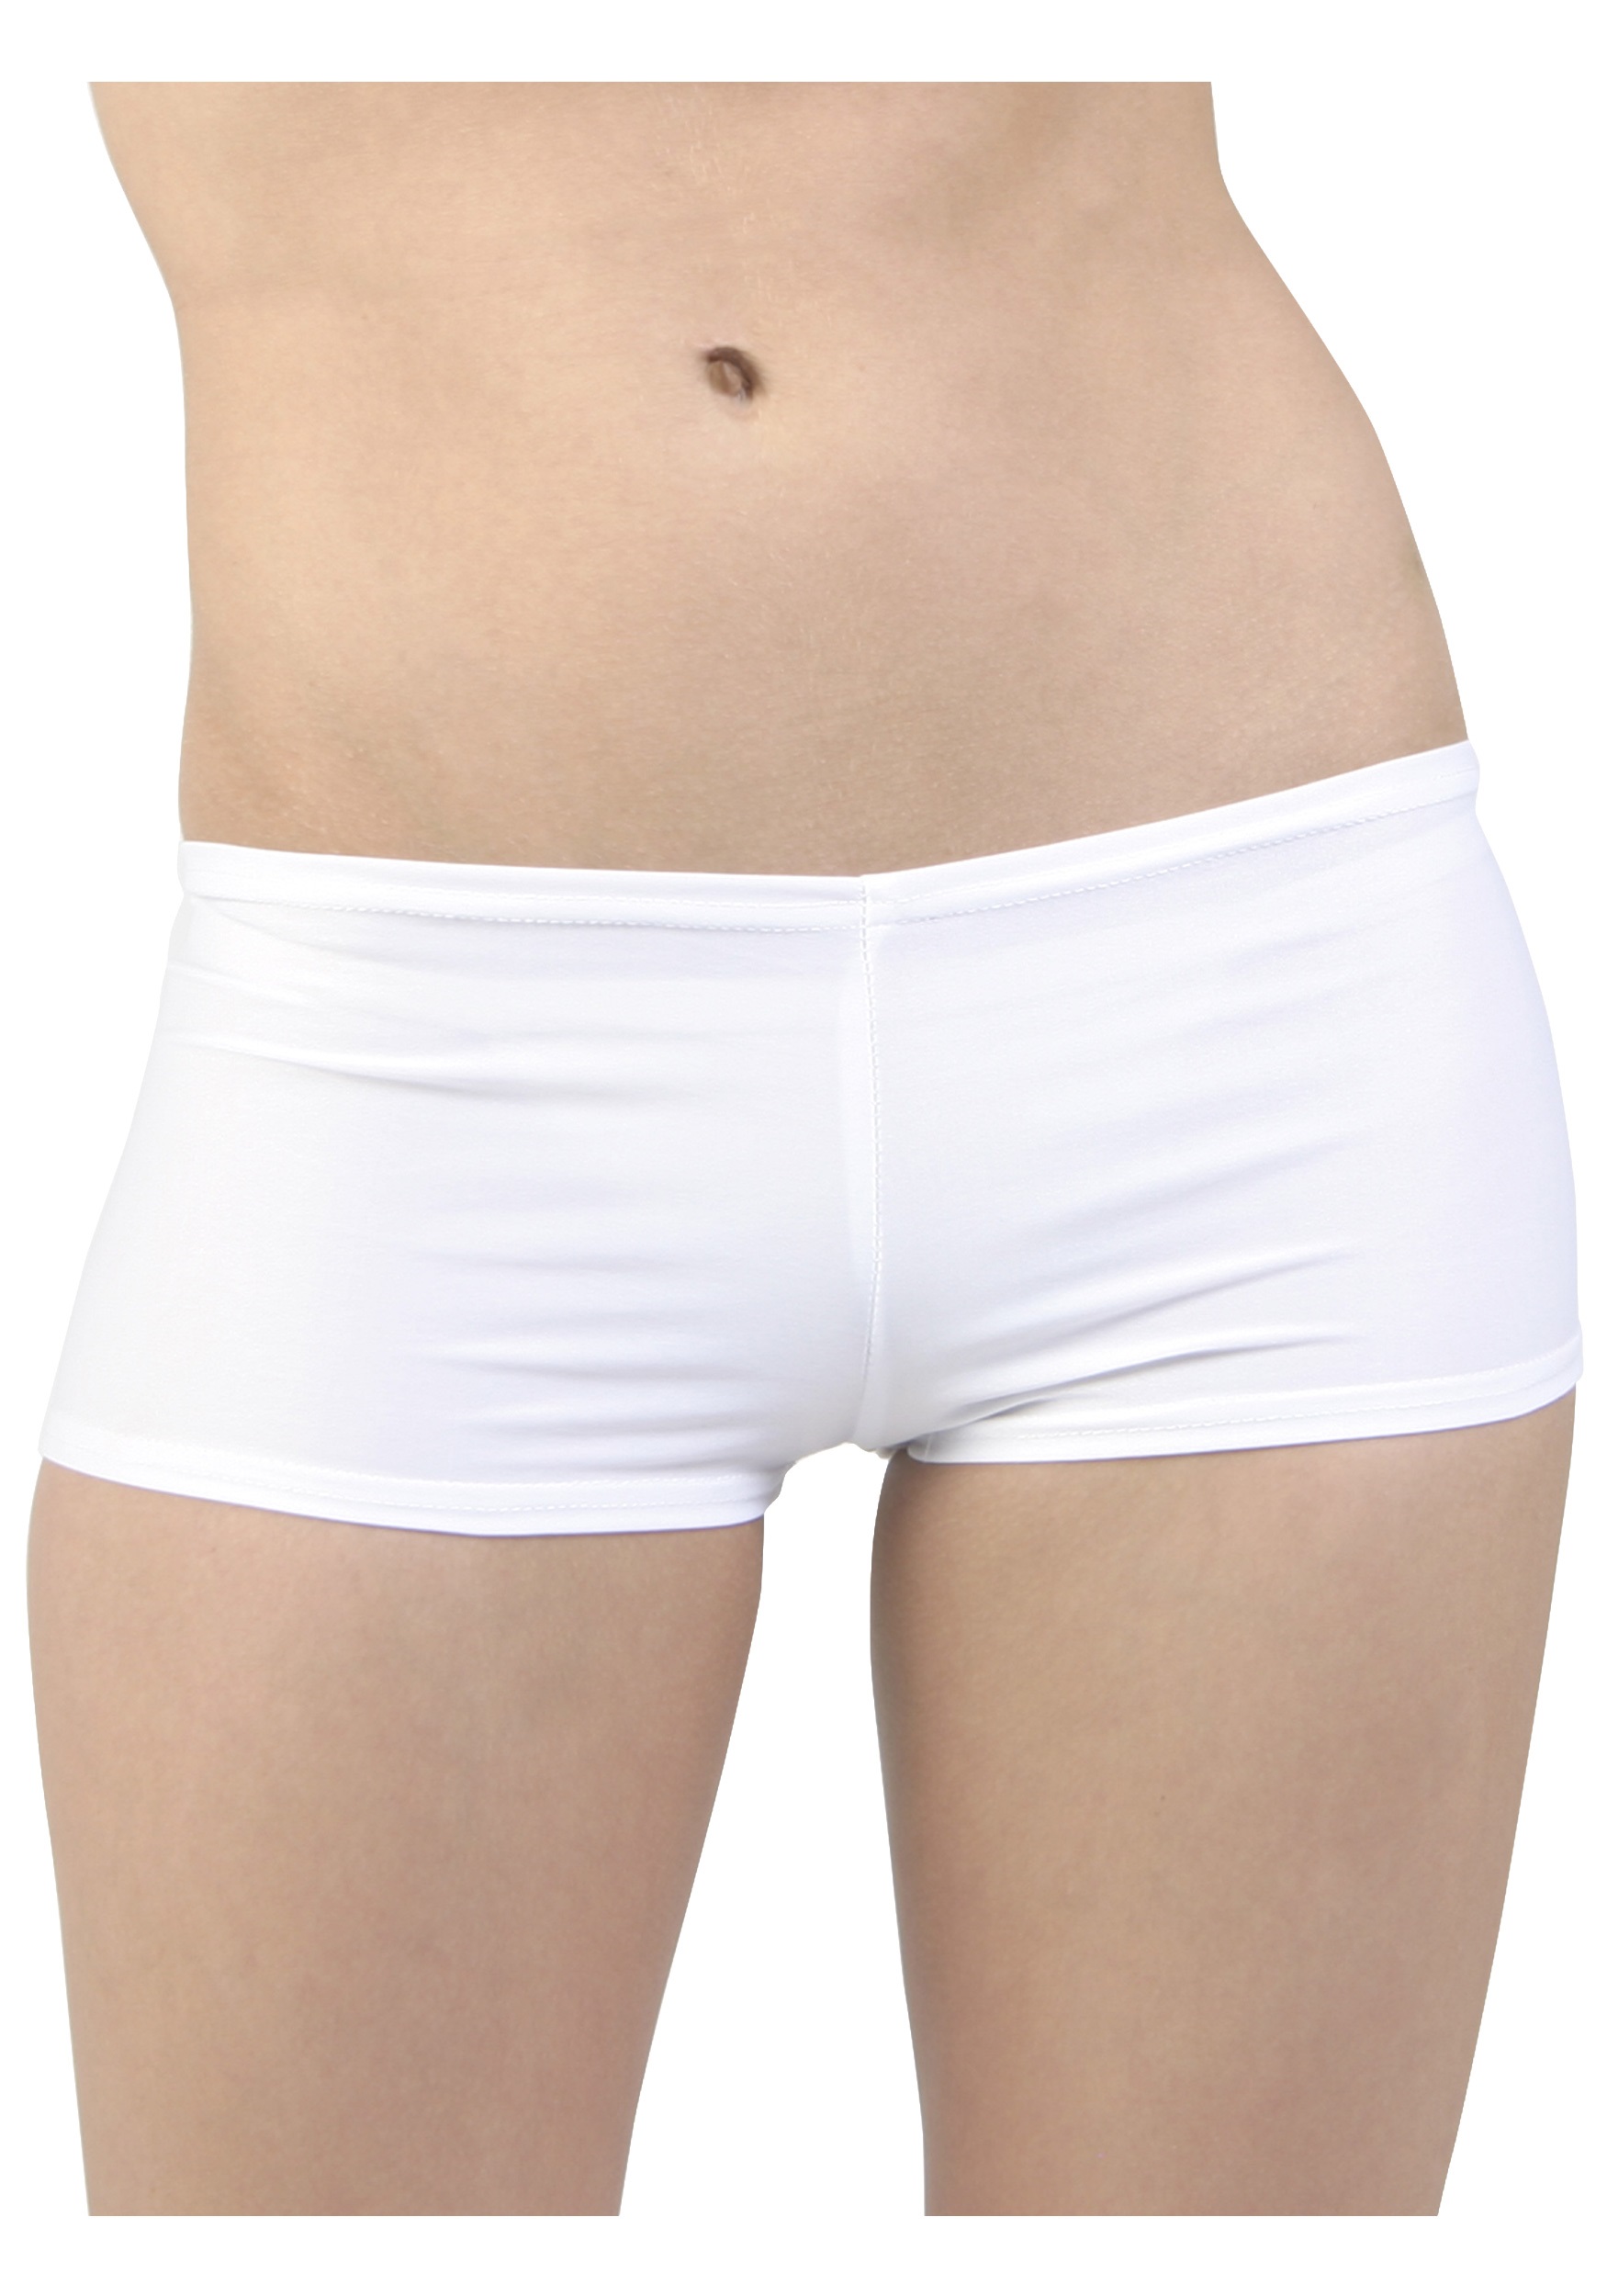 https://images.halloweencostumes.ca/products/5260/1-1/sexy-white-lycra-hot-pants.jpg